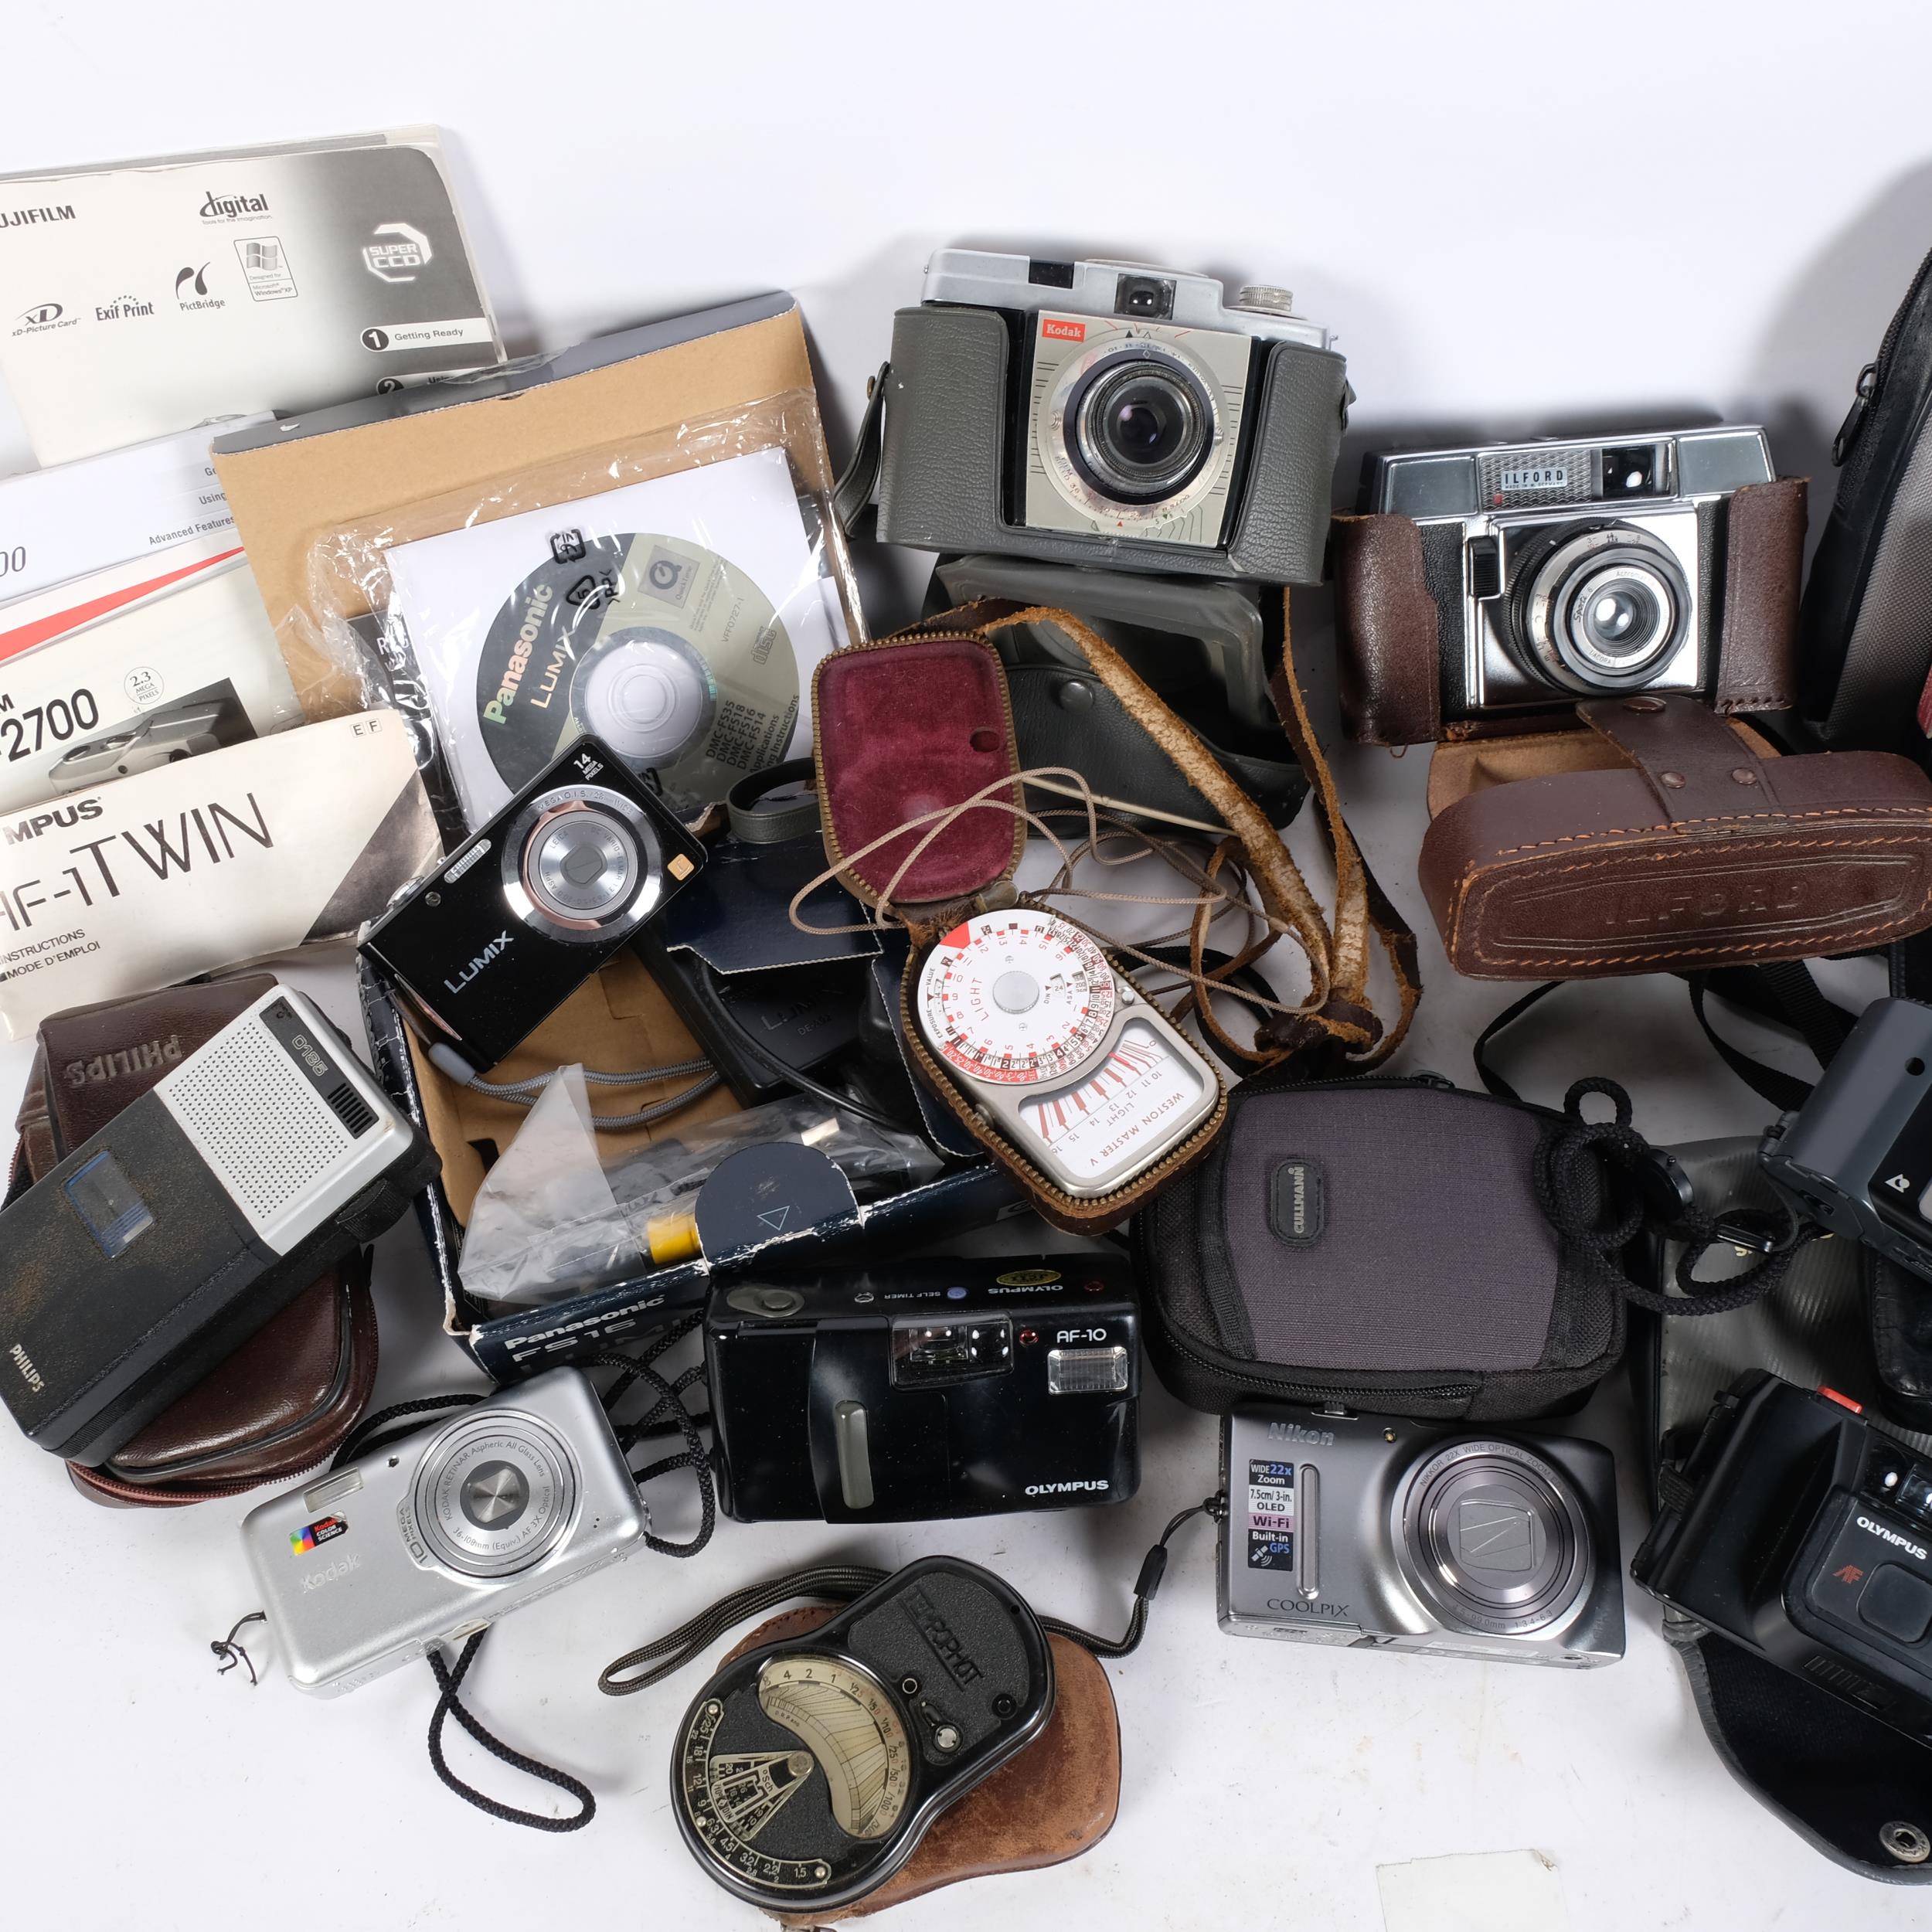 A quantity of Vintage cameras and equipment, including a Lumix Panasonic FS16, in original box - Image 2 of 2